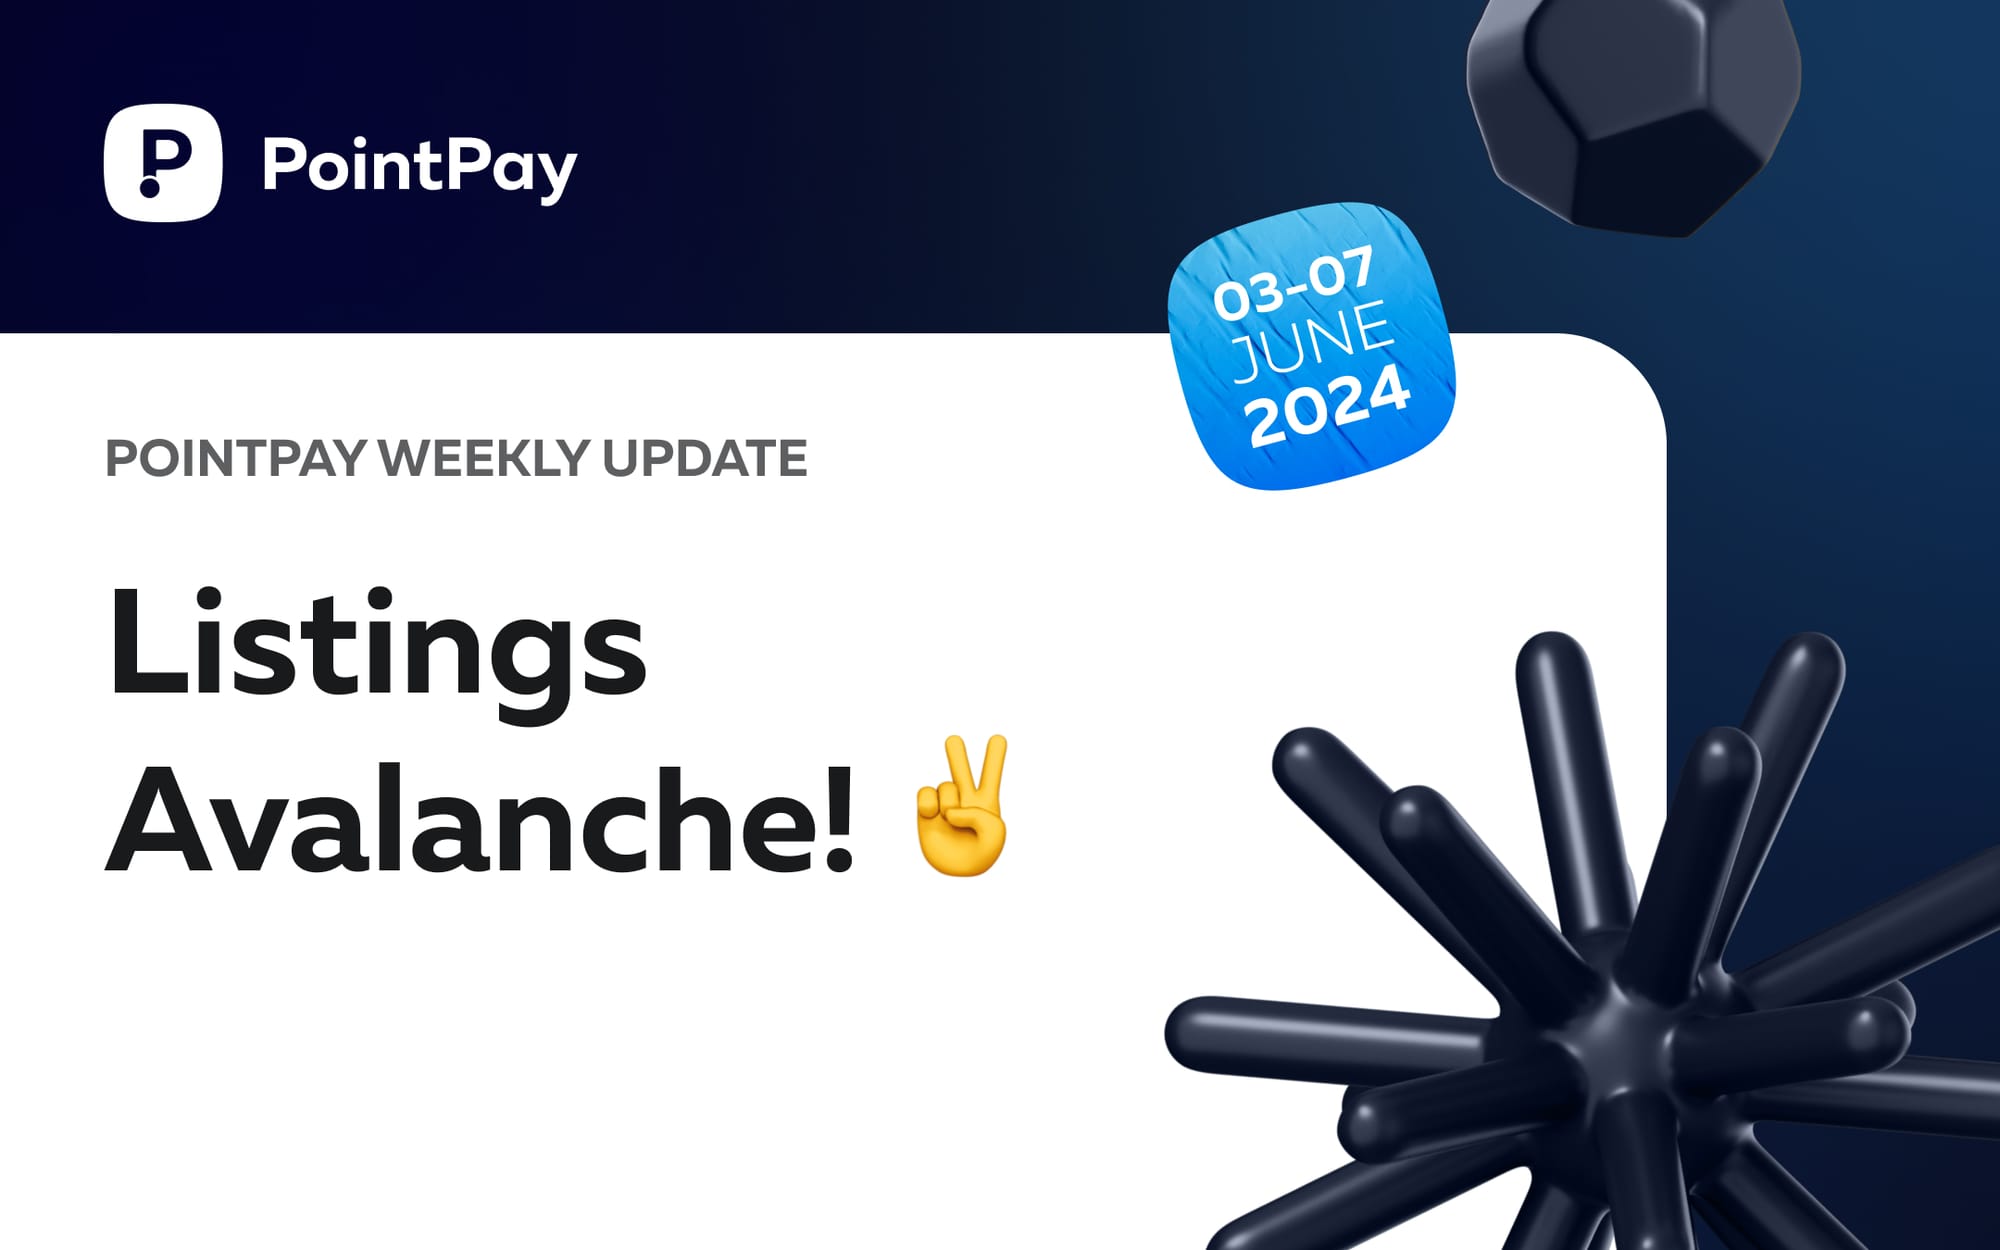 PointPay Weekly Update (03-07 June)